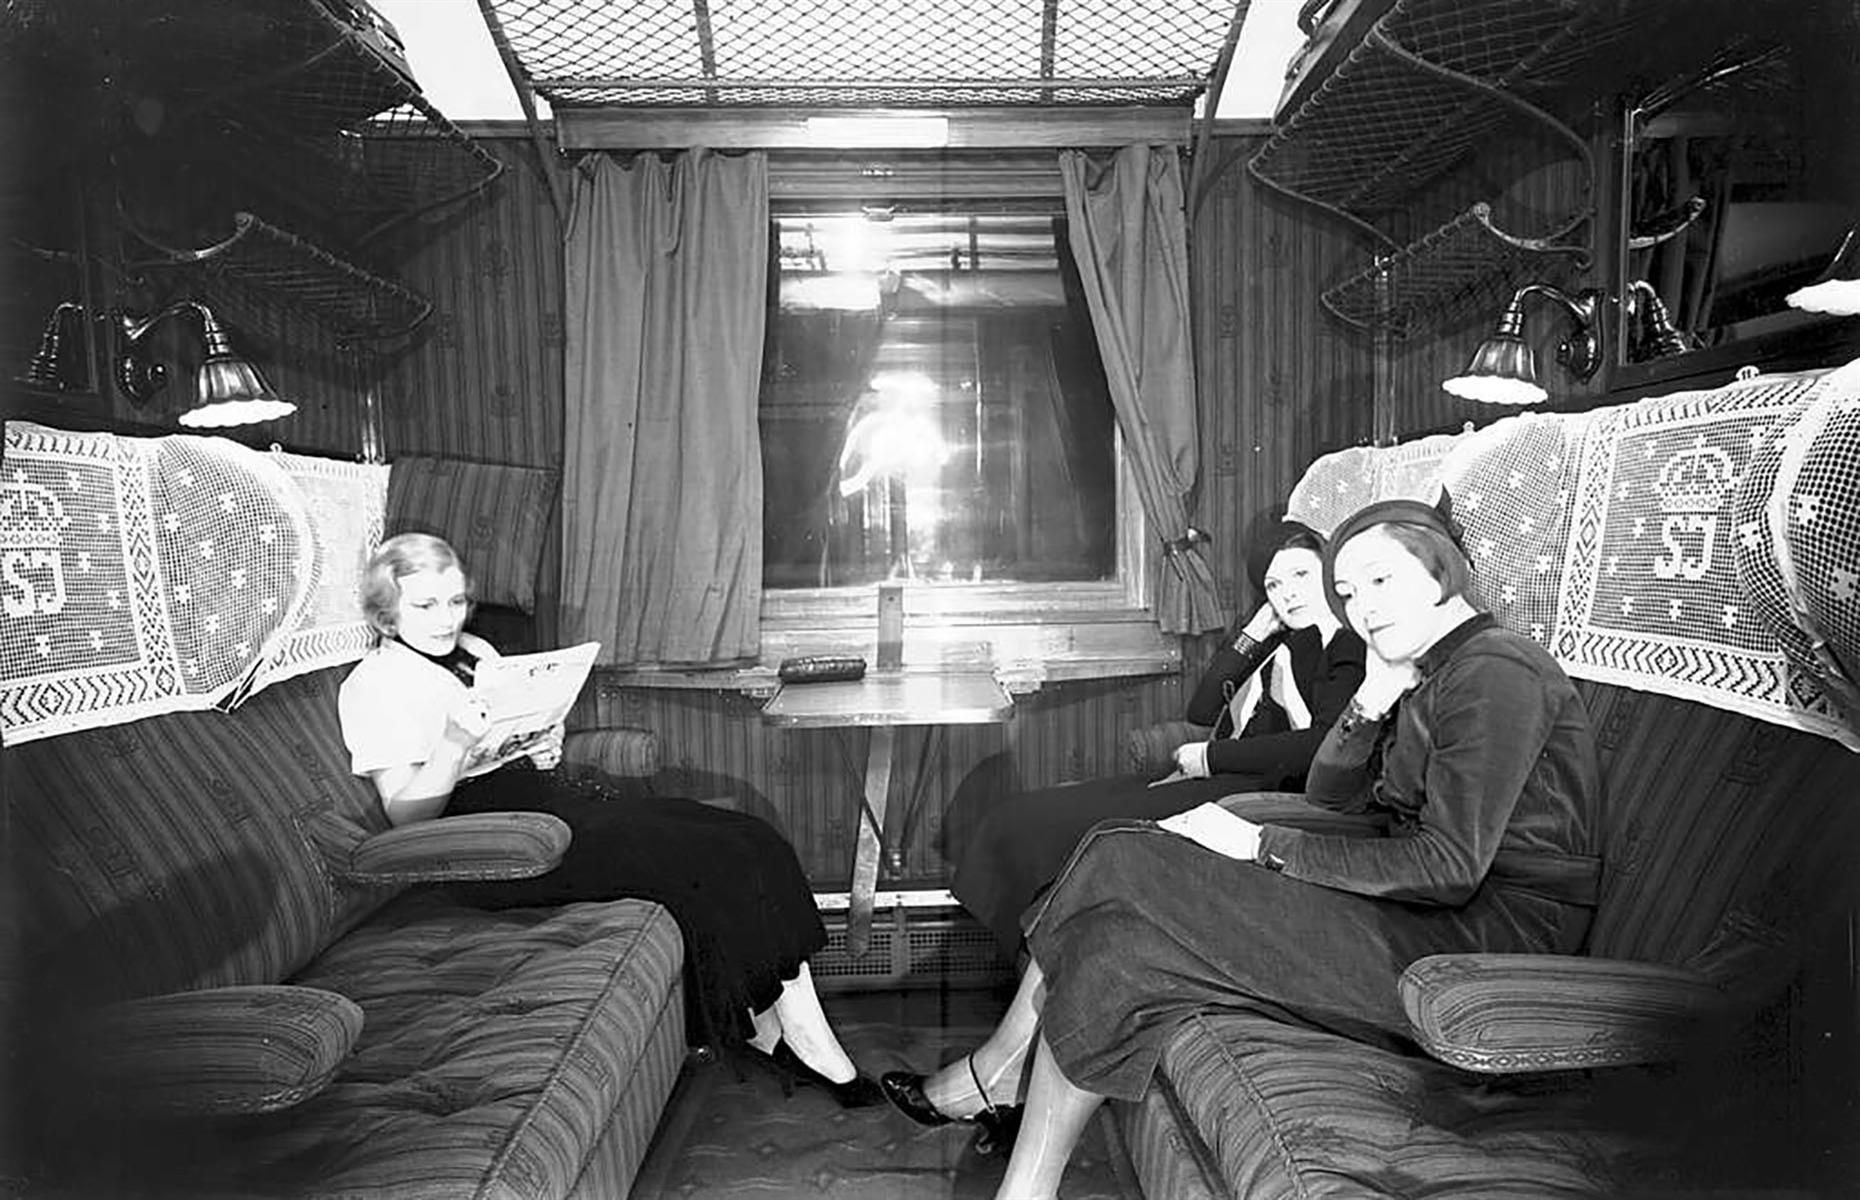 This image shows that traveling in second class was still very comfortable in some state-operated trains like Sweden. The SJ on the embroidered head rest covers stands for Statens Järnvägar – Swedish for Swedish State Railways.